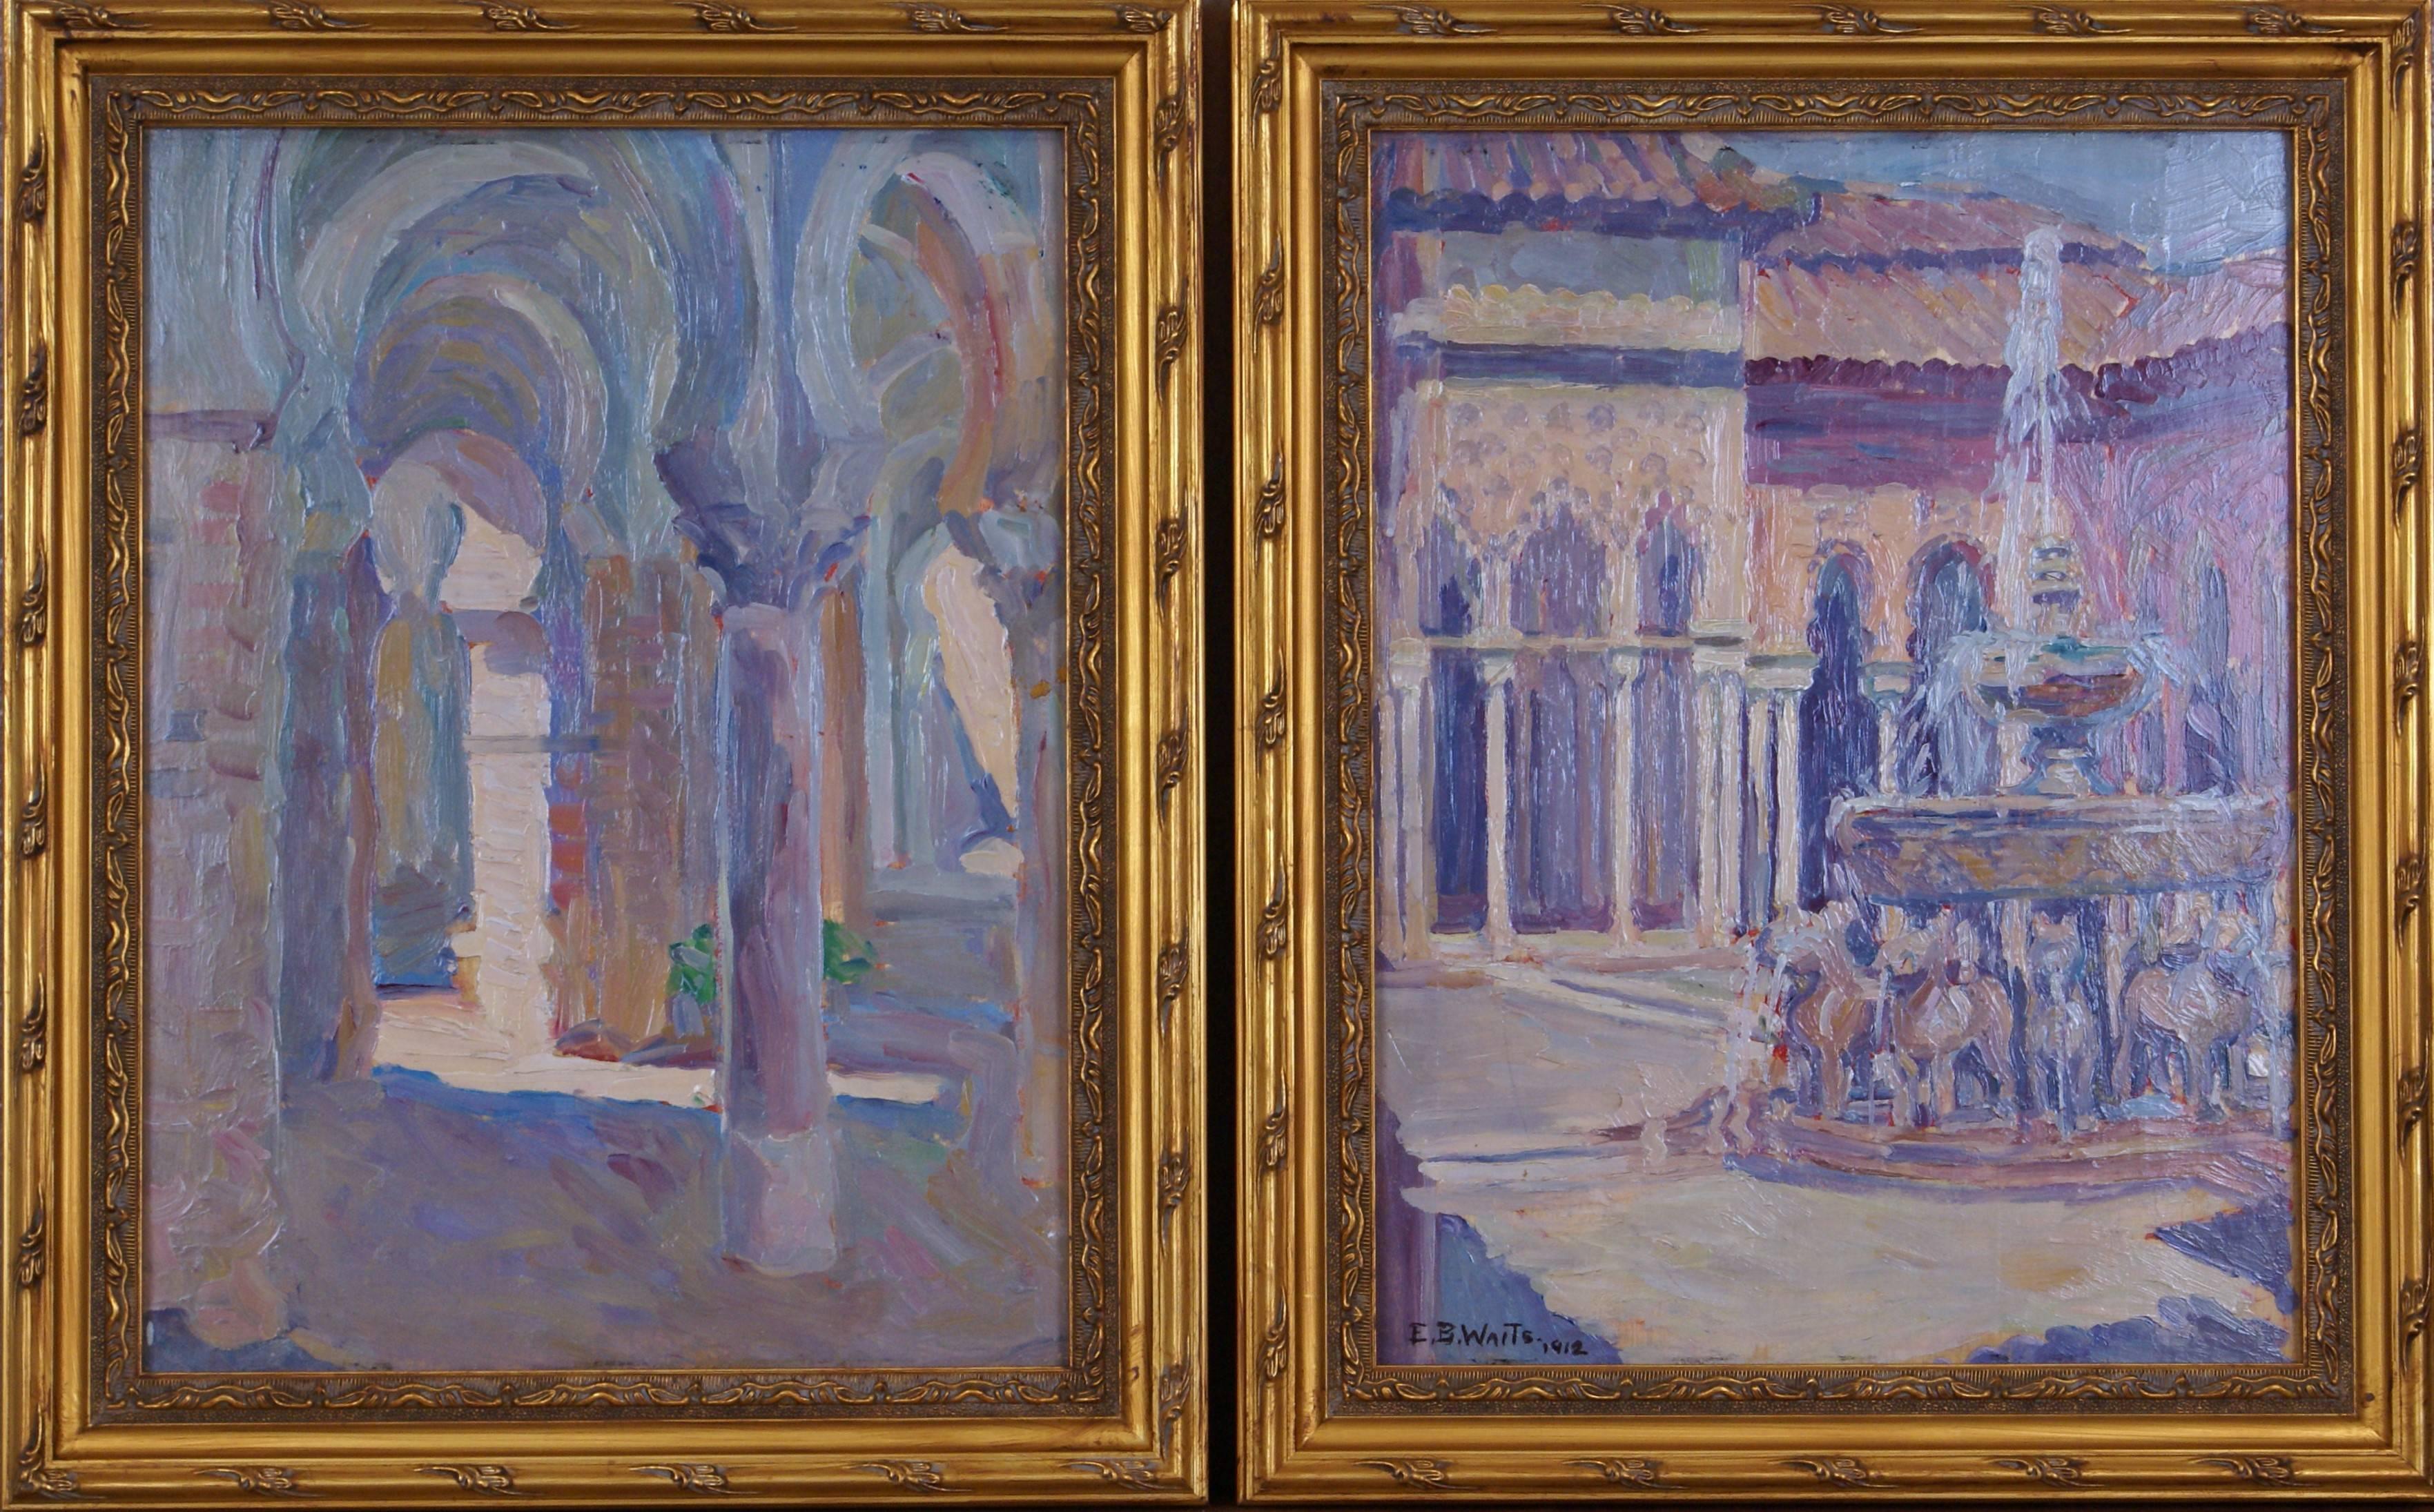 Emily Burling Waite Landscape Painting - The Alhambra:The Court of the Myrtles/The Court of Lions  Granada Spain